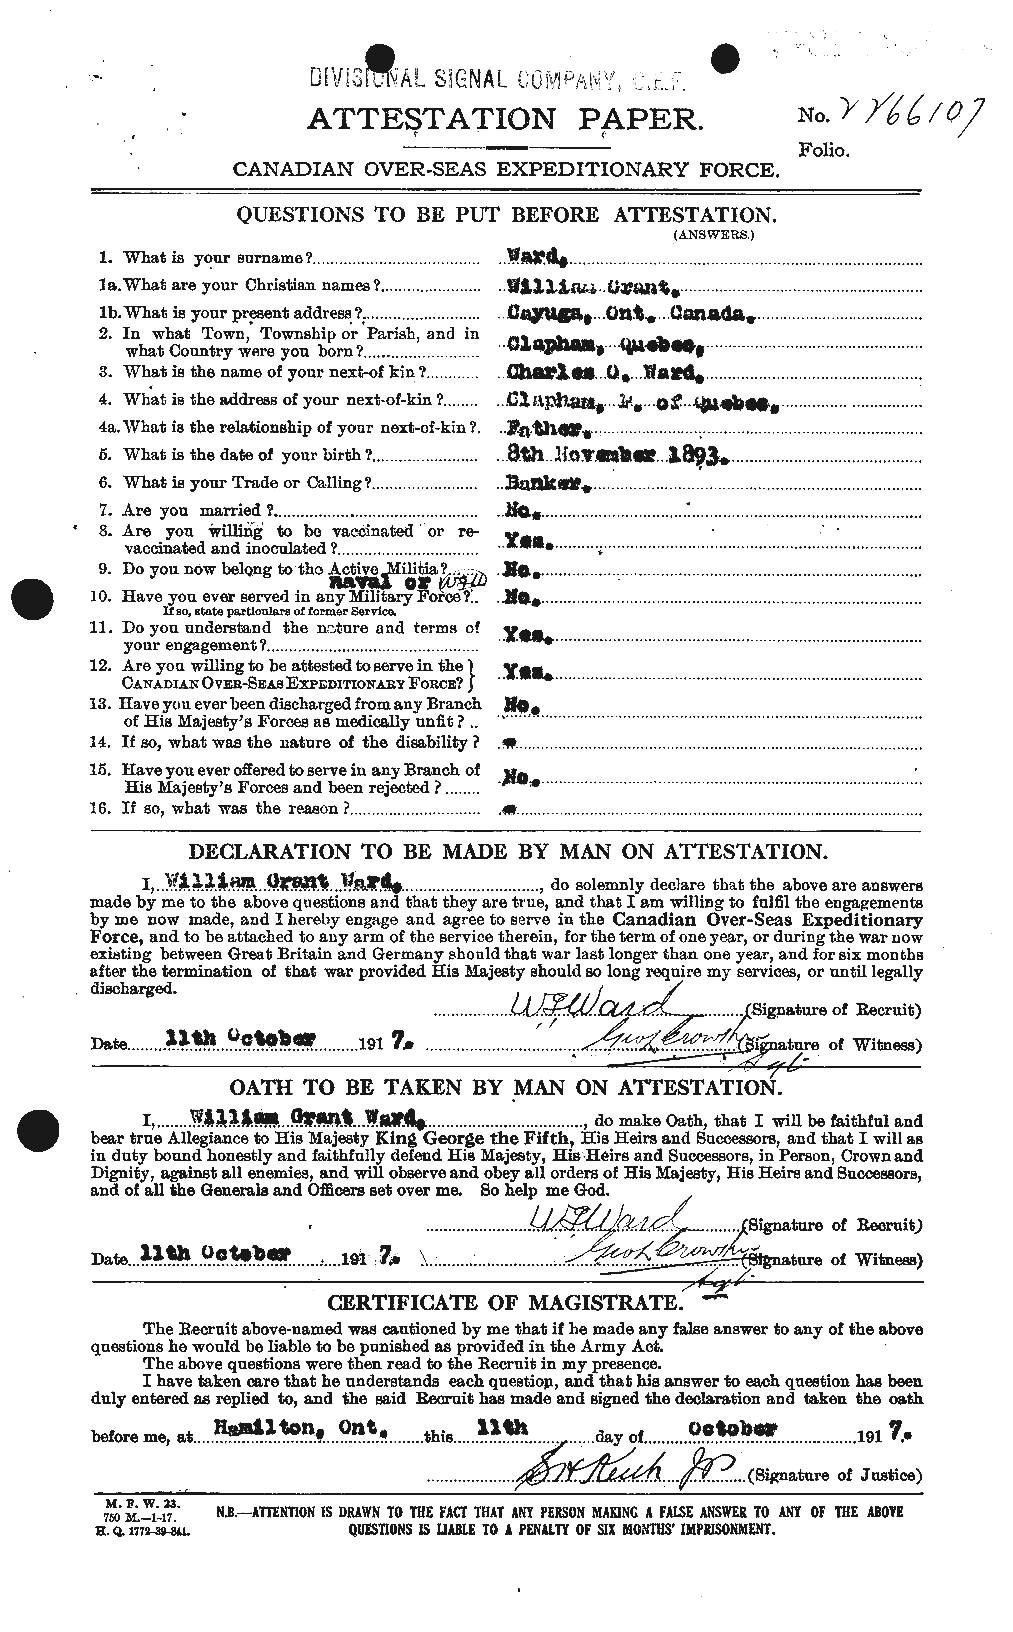 Personnel Records of the First World War - CEF 659819a